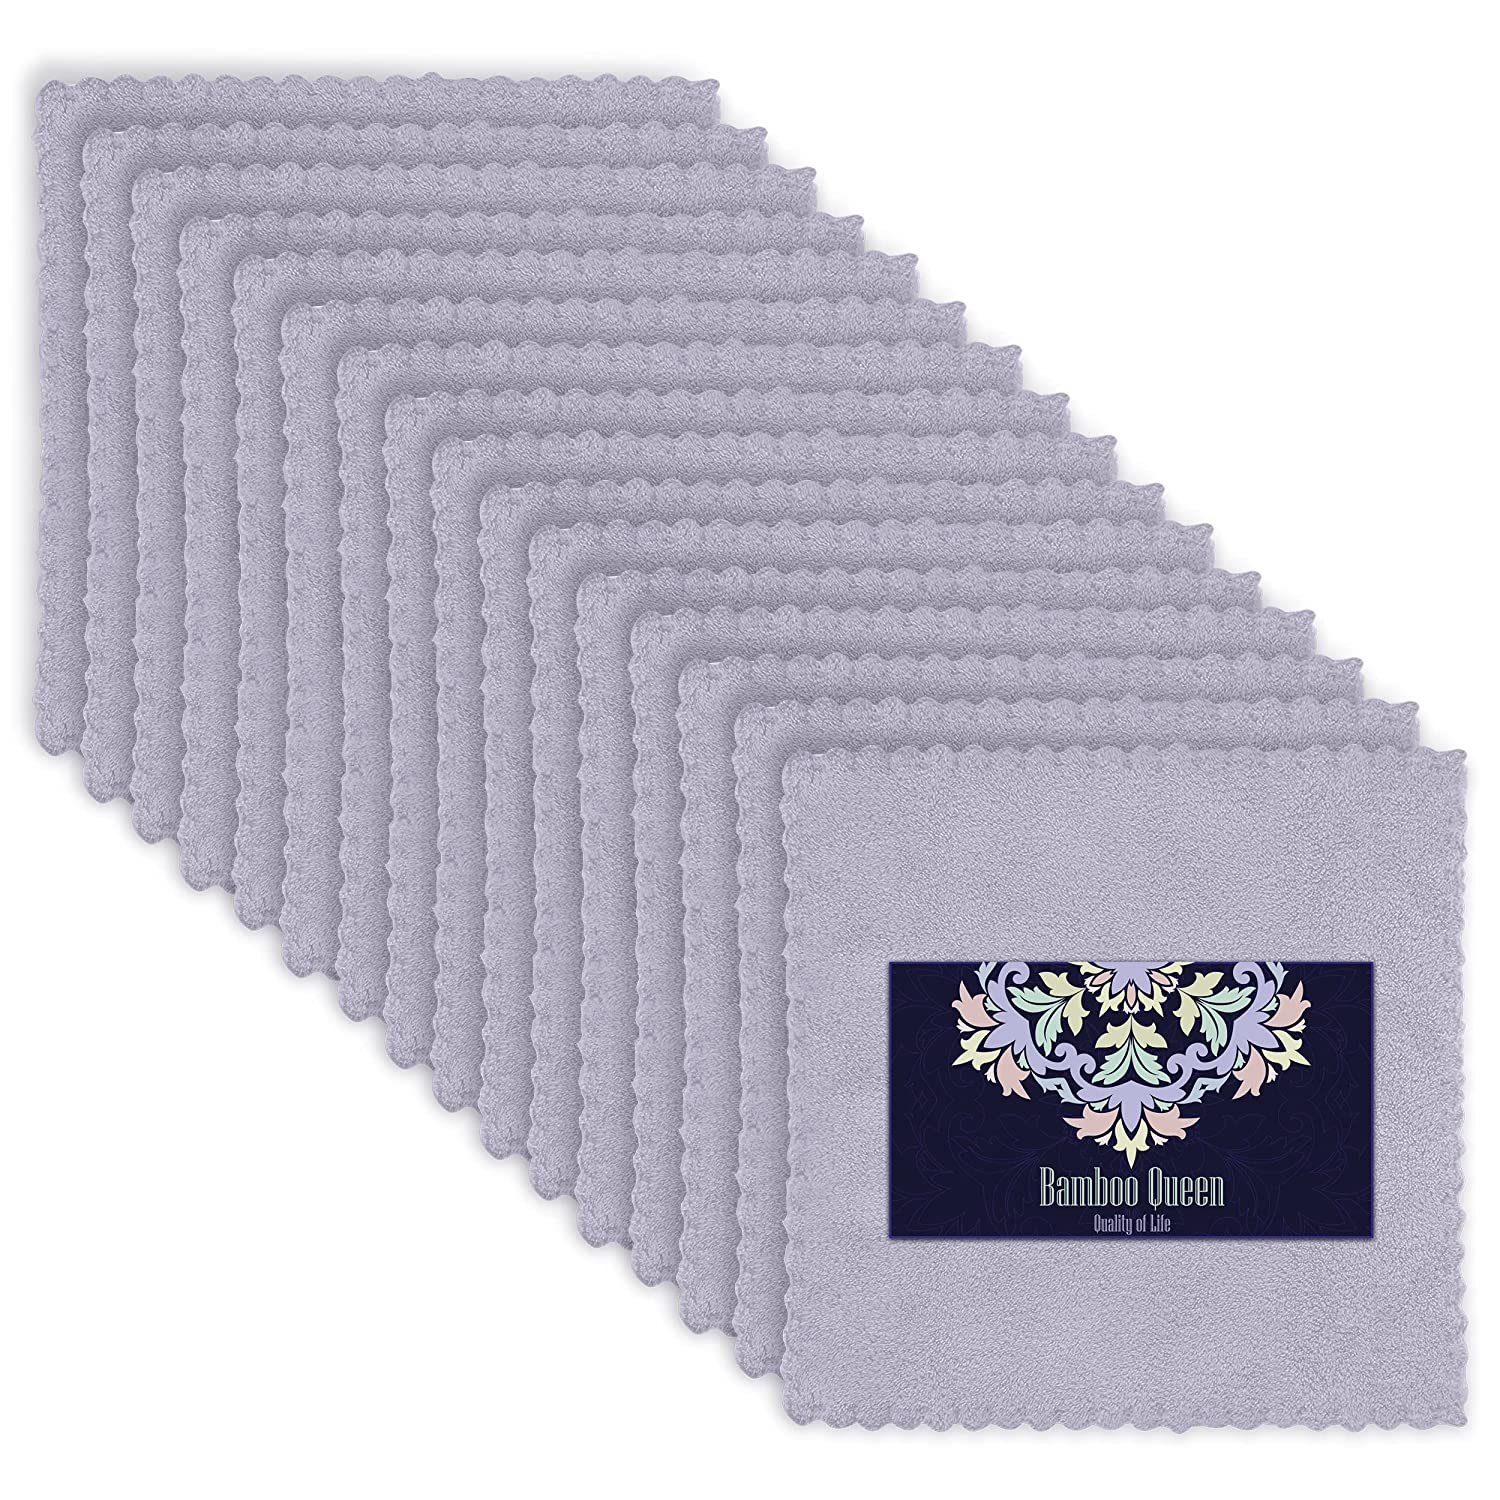 8" x 8" Bamboo Queen Super Soft Premium Makeup Remover Cloths (various colors); 16-Count $5, 48-Count $10 + Free Shipping w/ Prime or on $25+